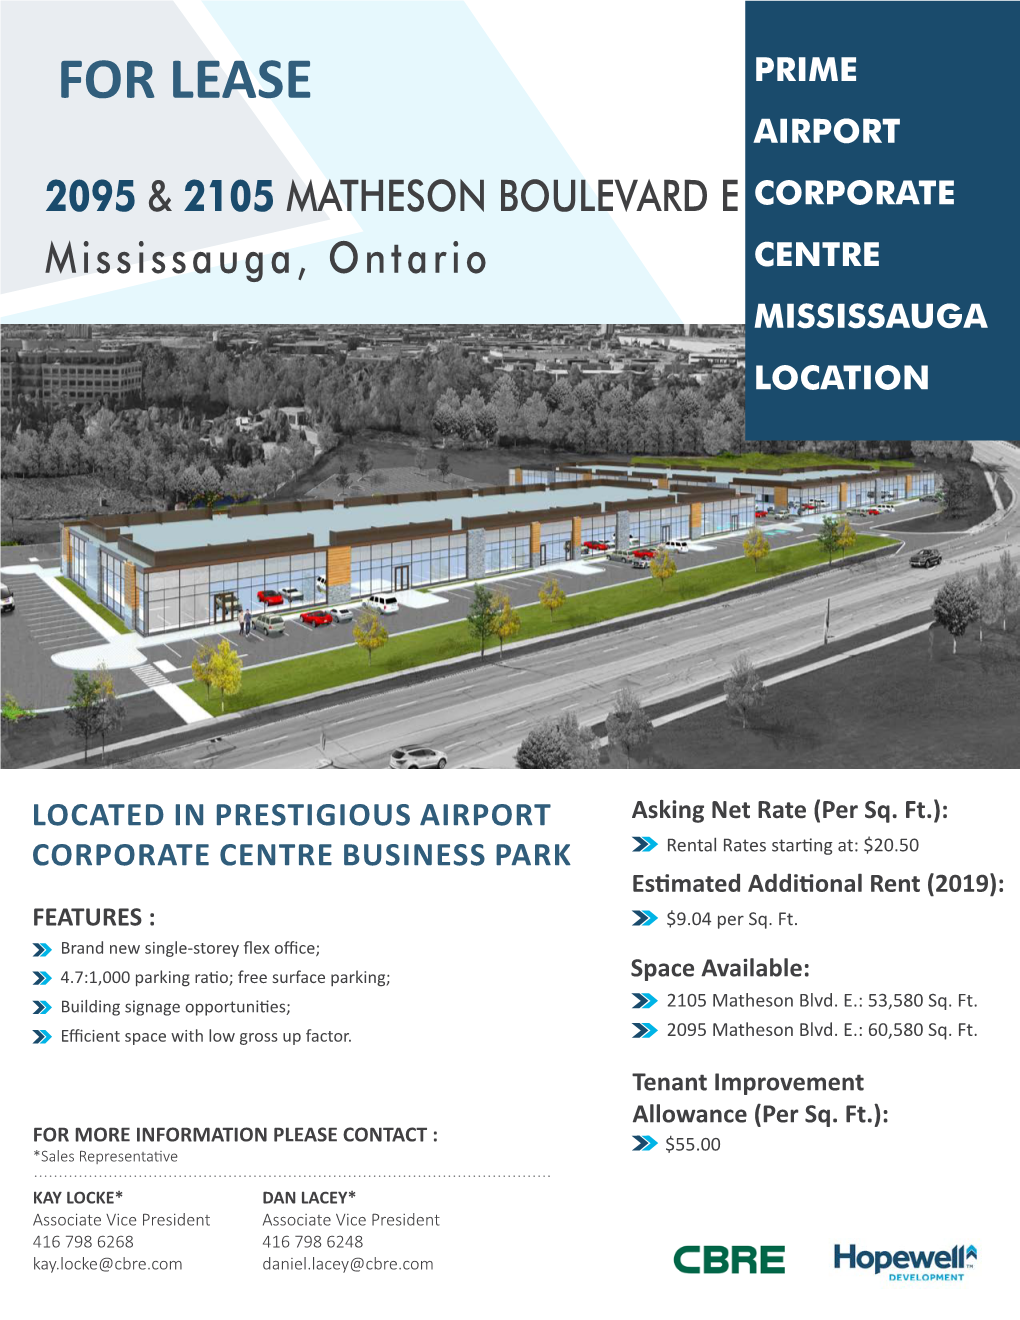 FOR LEASE PRIME AIRPORT 2095 & 2105 MATHESON BOULEVARD E CORPORATE Mississauga, Ontario CENTRE MISSISSAUGA LOCATION